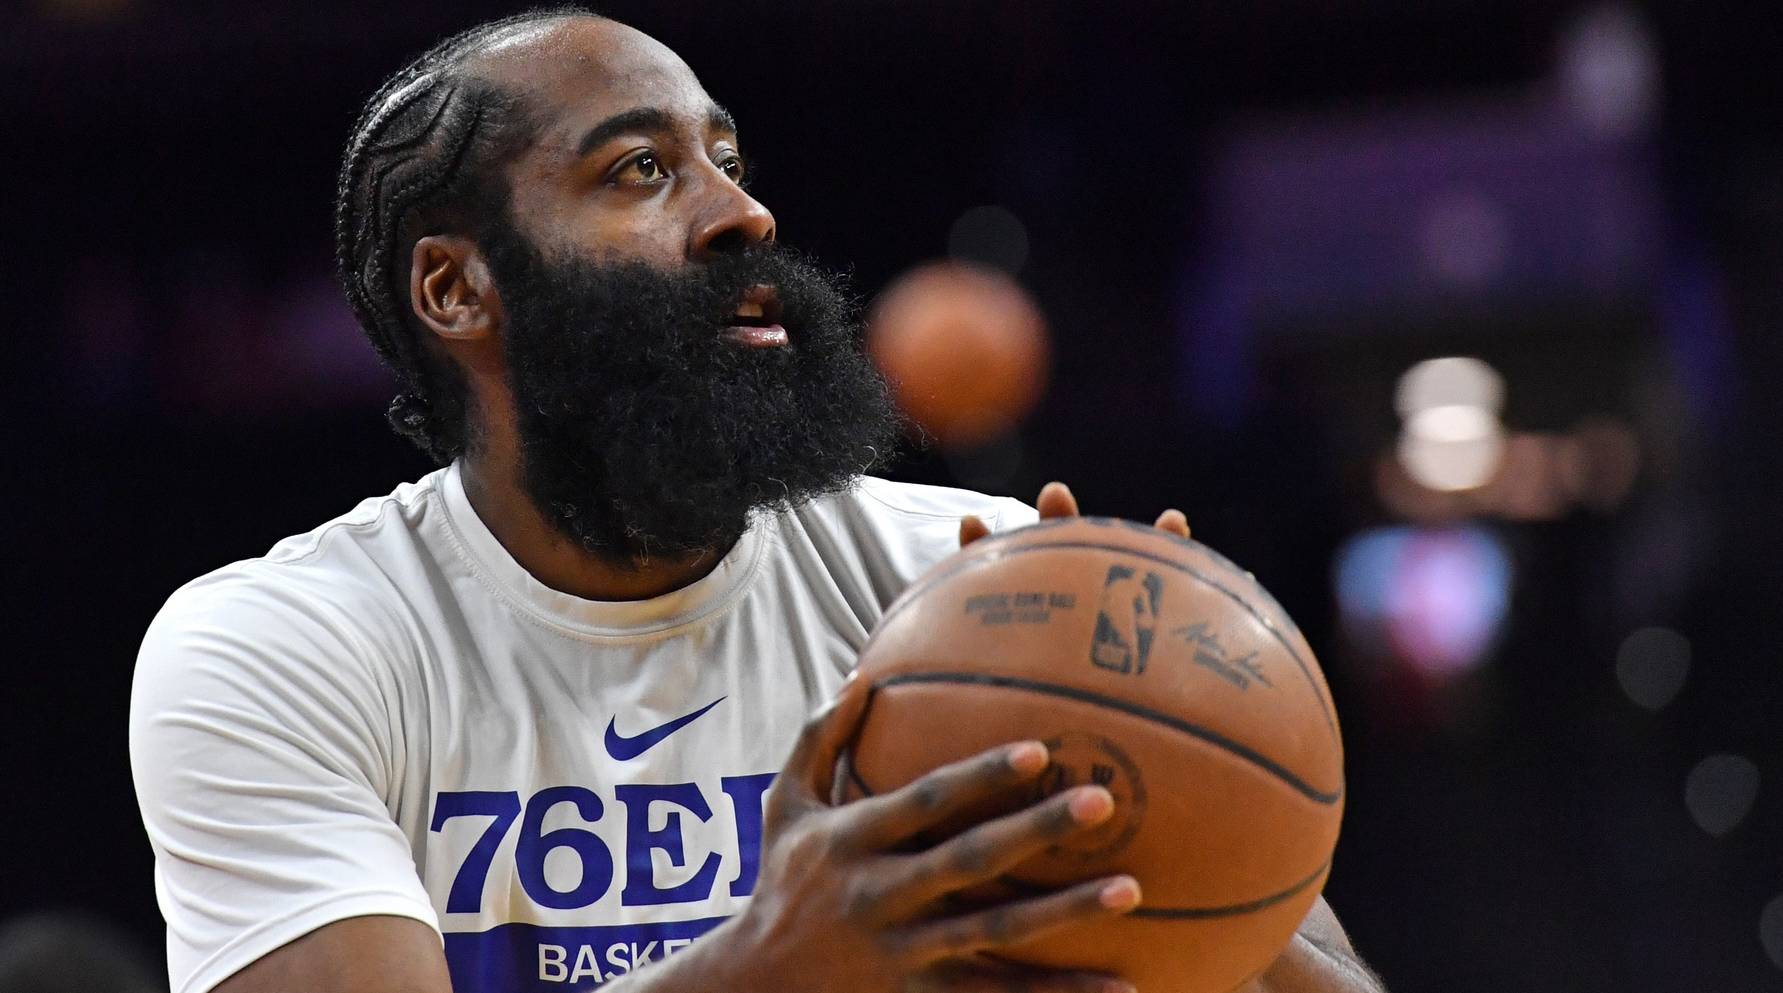 76ers point guard James Harden shoots a shot in warmups before a game.